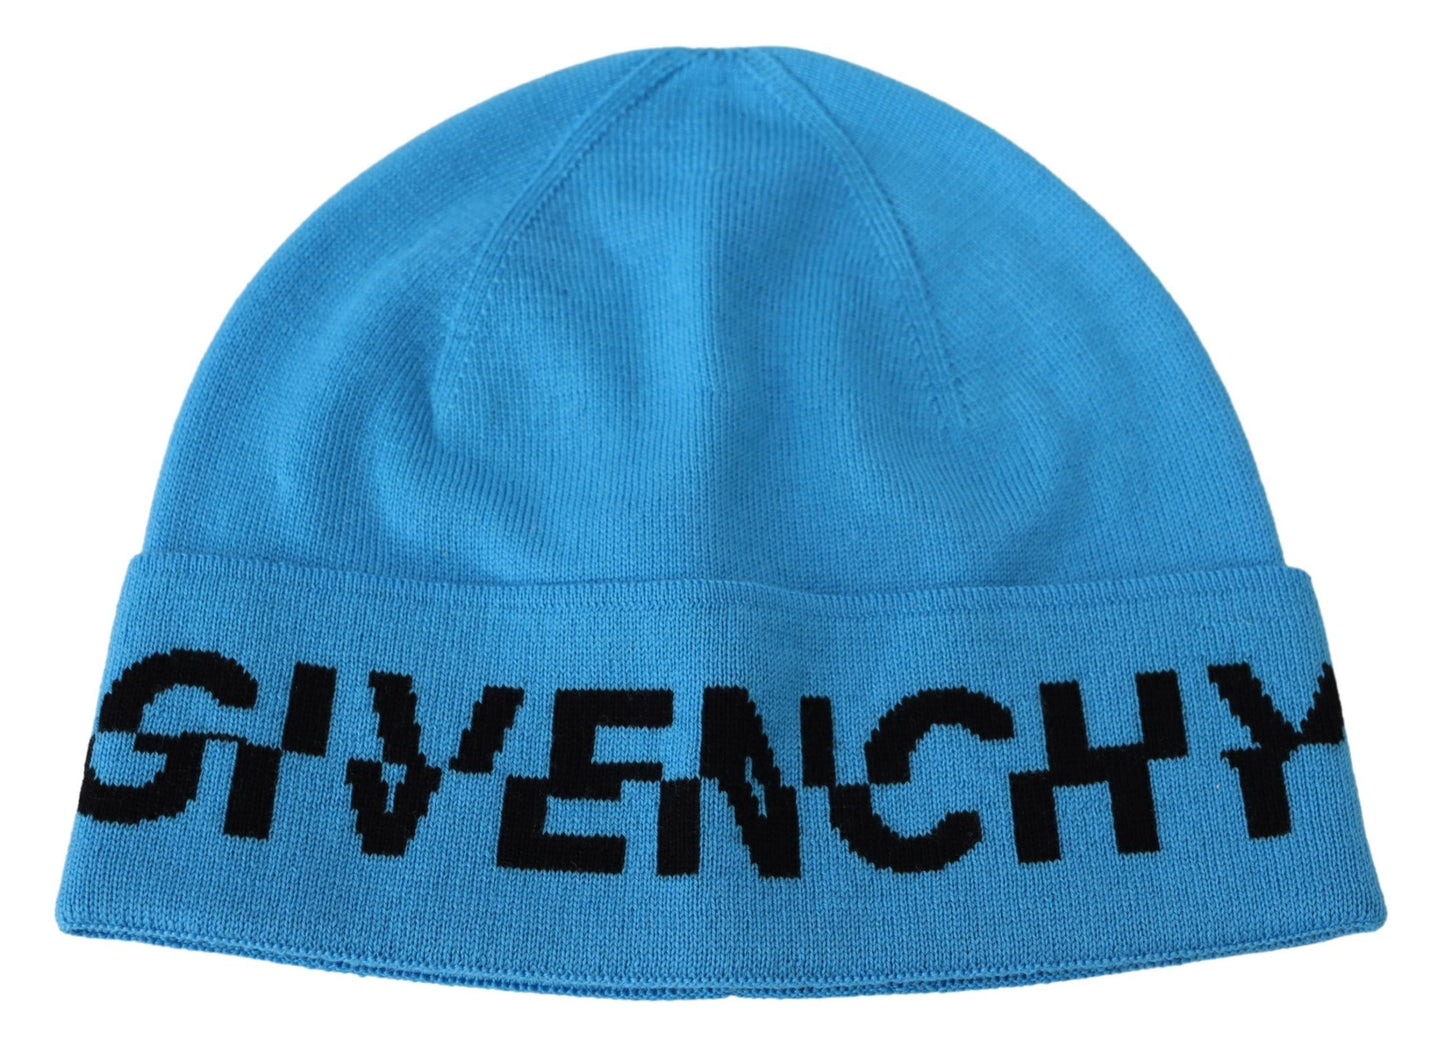 Givenchy Blue Wool Hat Logo Winter Warm Beanie Unisex Hat - Designed by Givenchy Available to Buy at a Discounted Price on Moon Behind The Hill Online Designer Discount Store